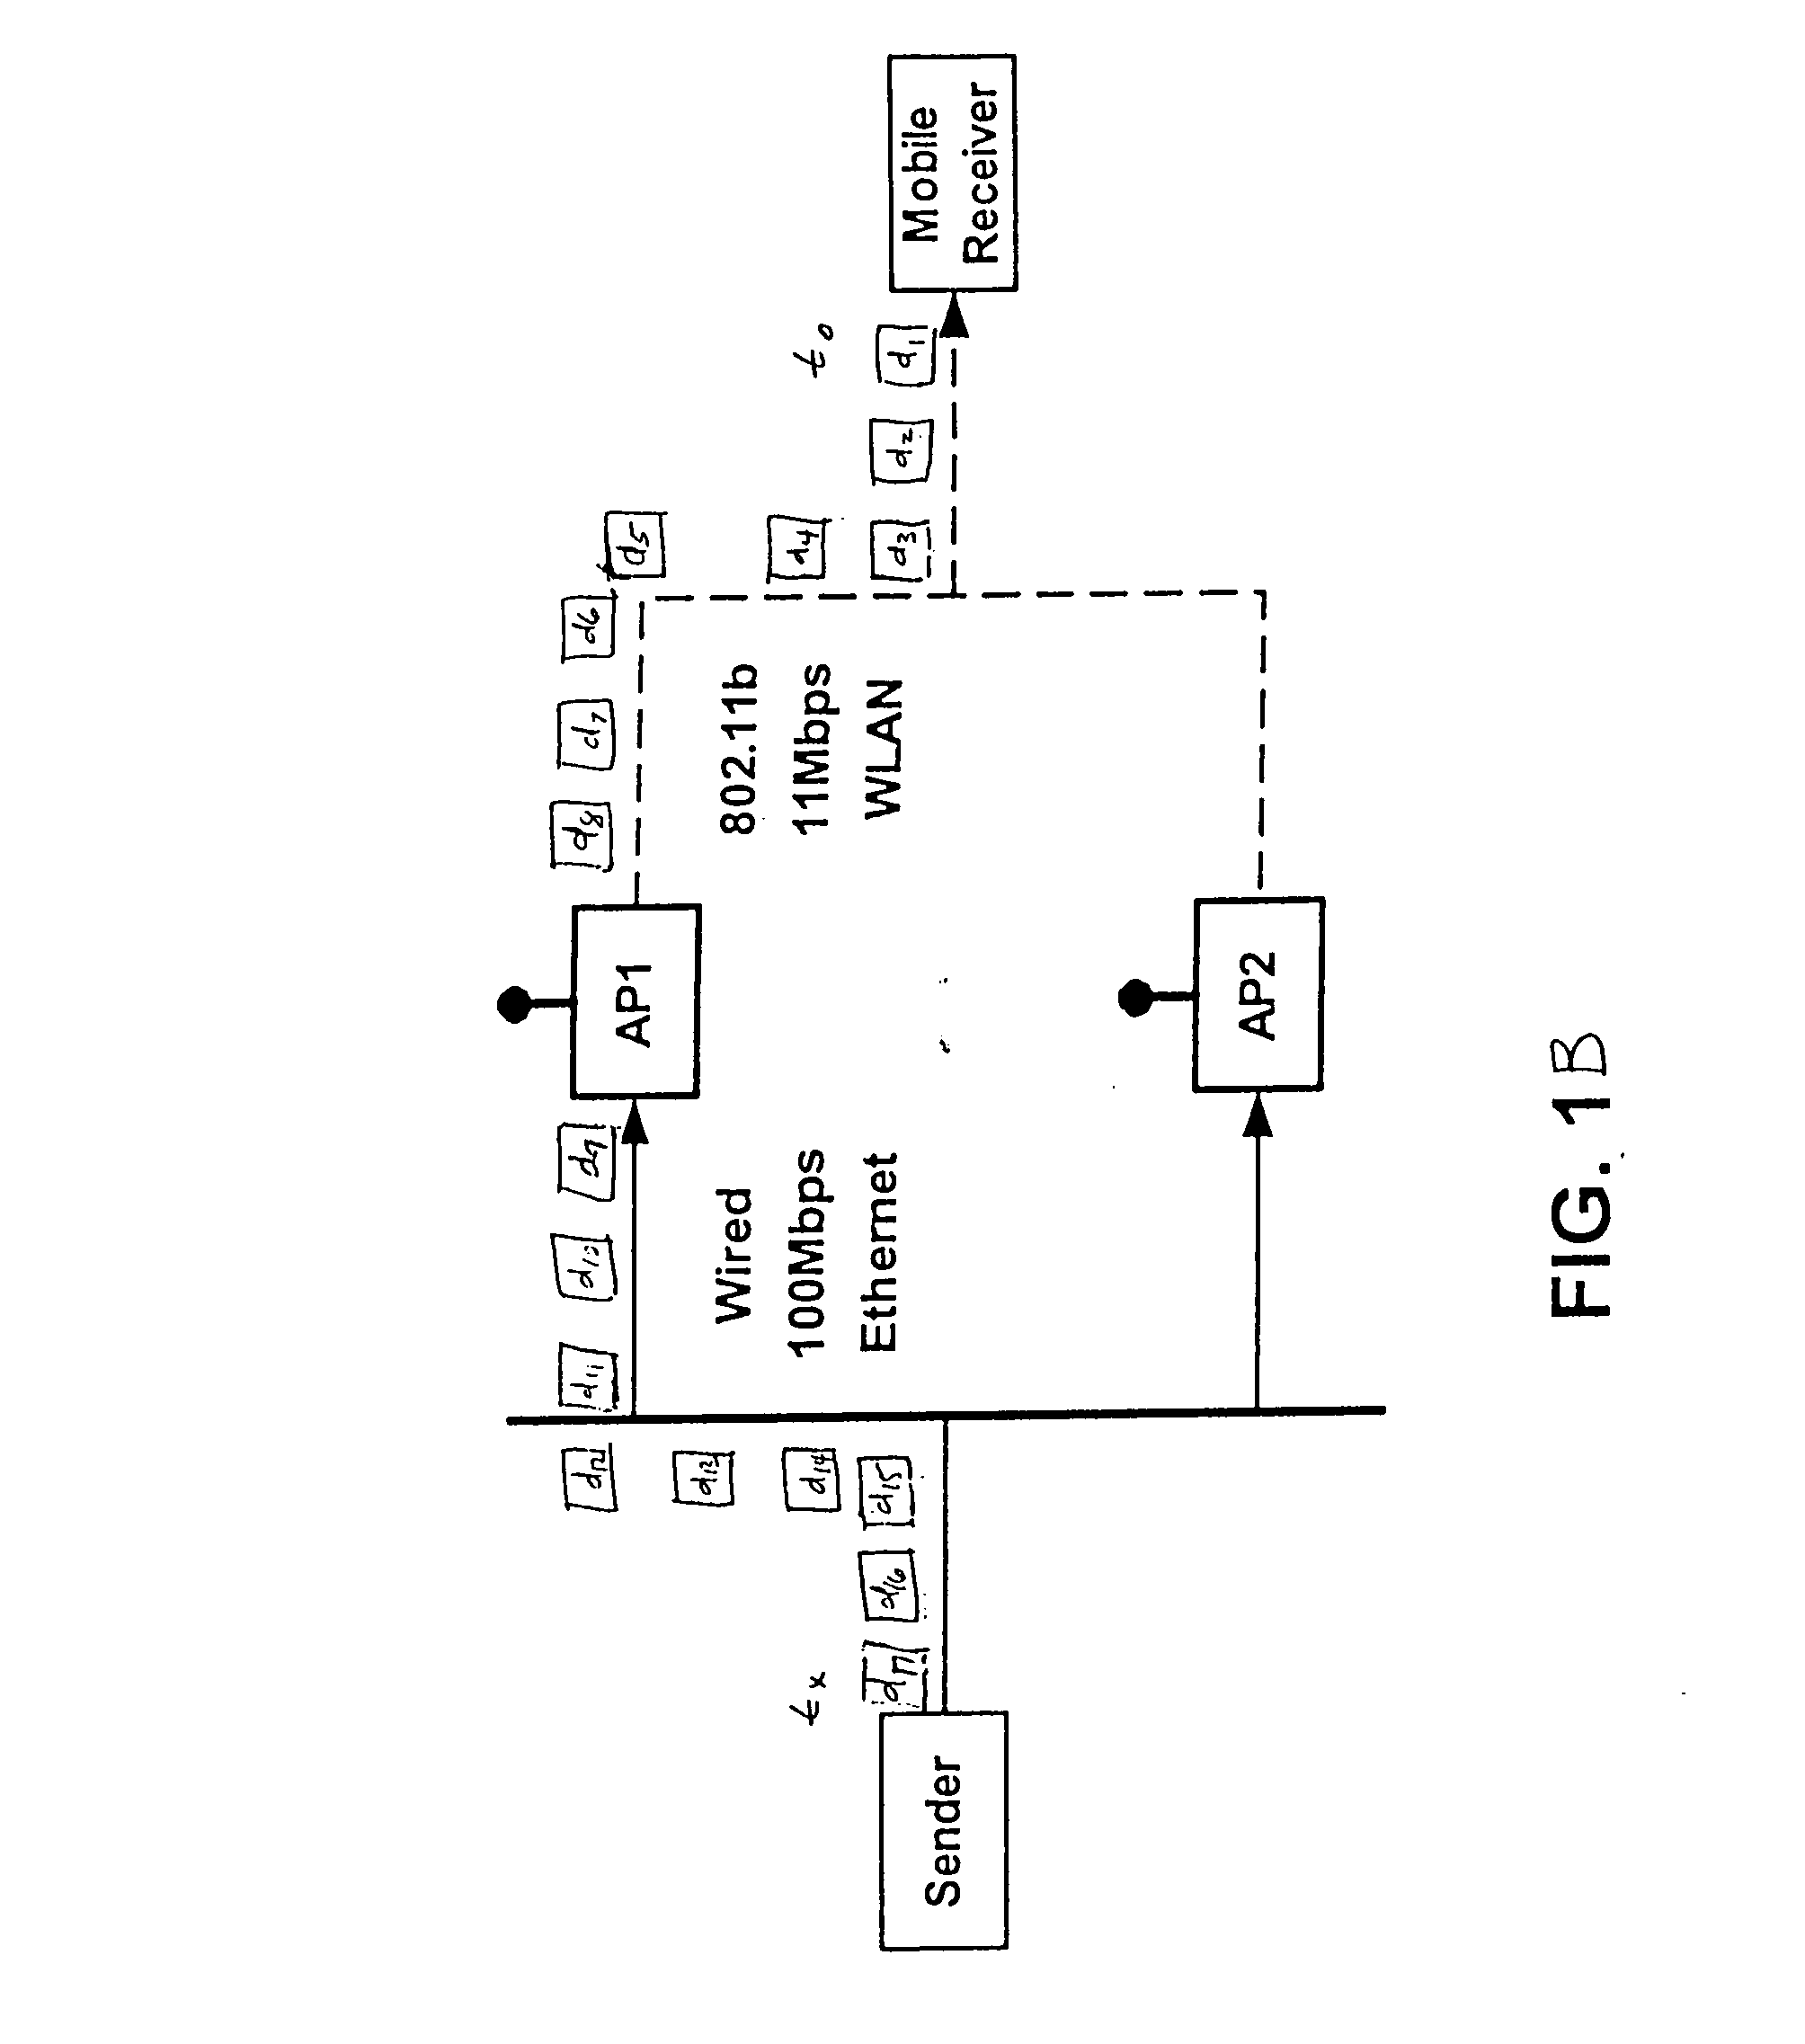 Systems and methods for multi-access point transmission of data using a plurality of access points